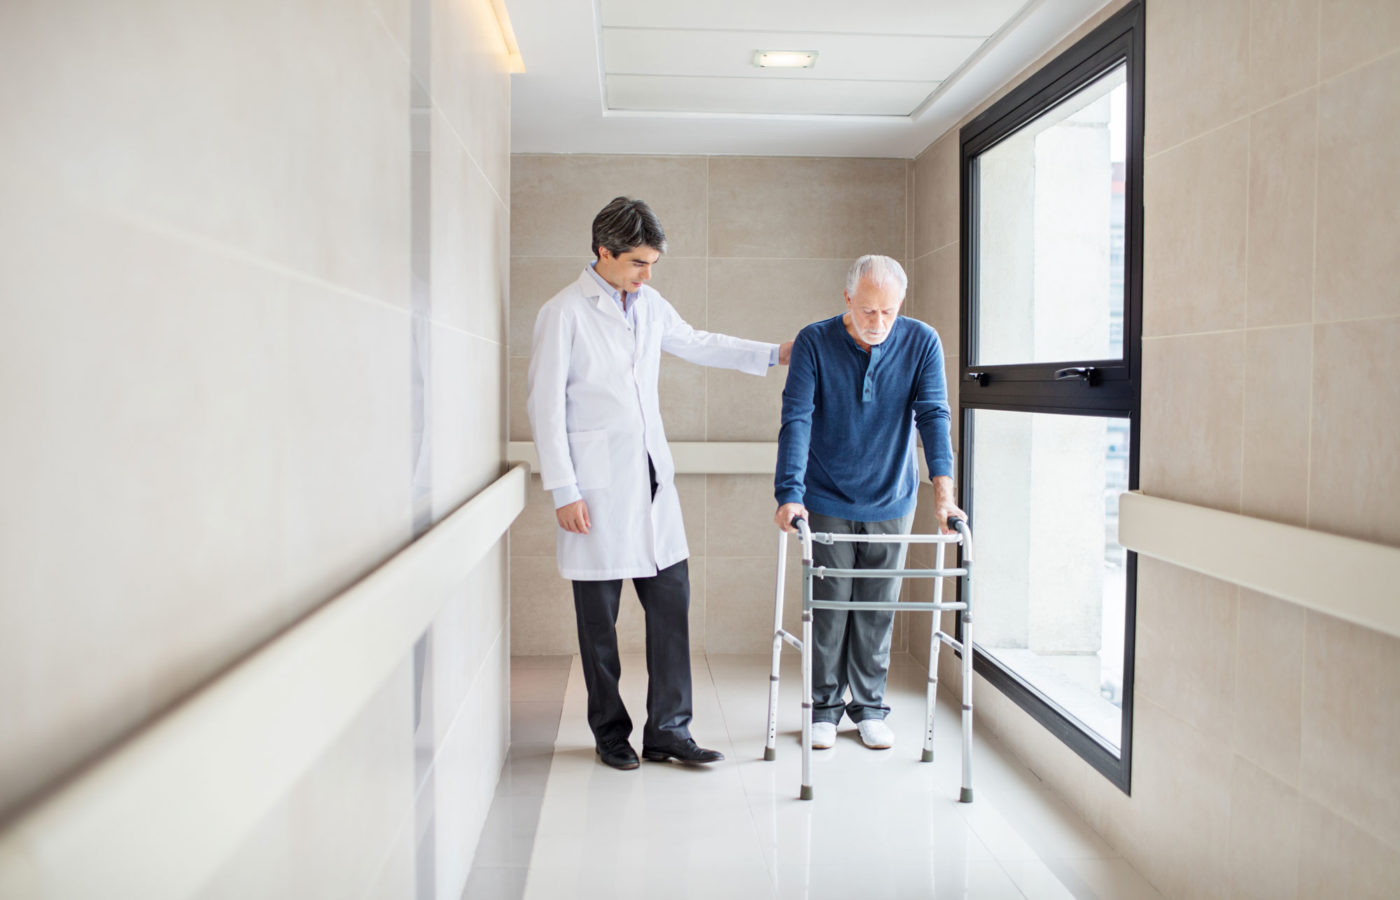 Elderly man with a walker is helped by a physician